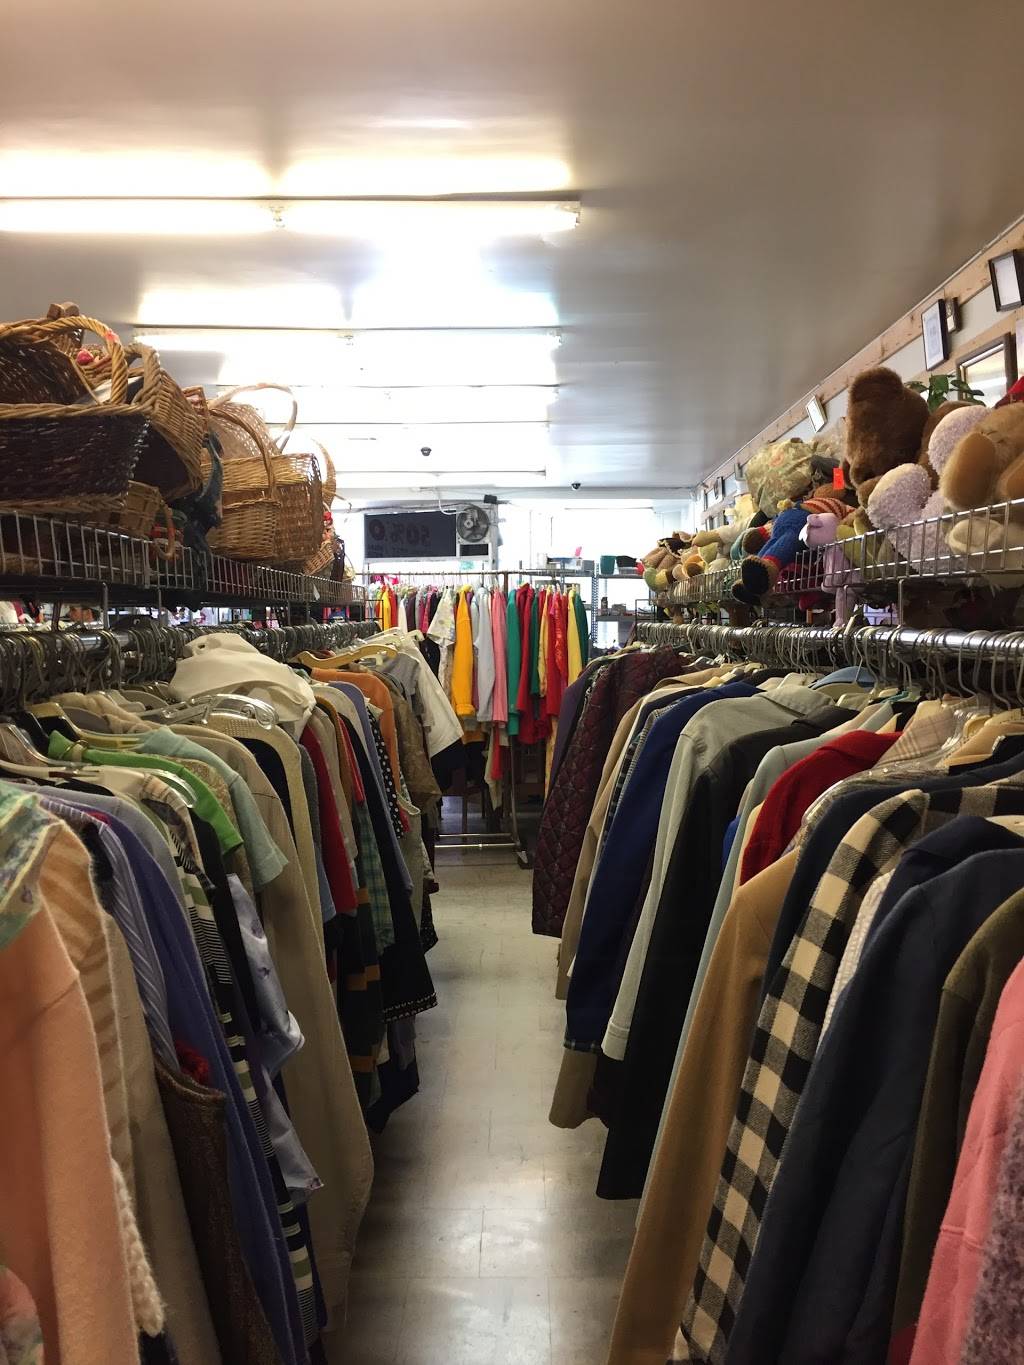 Son of A Vet Thrift Shop | 3310 N Eastern Ave, Los Angeles, CA 90032, USA | Phone: (323) 227-1808